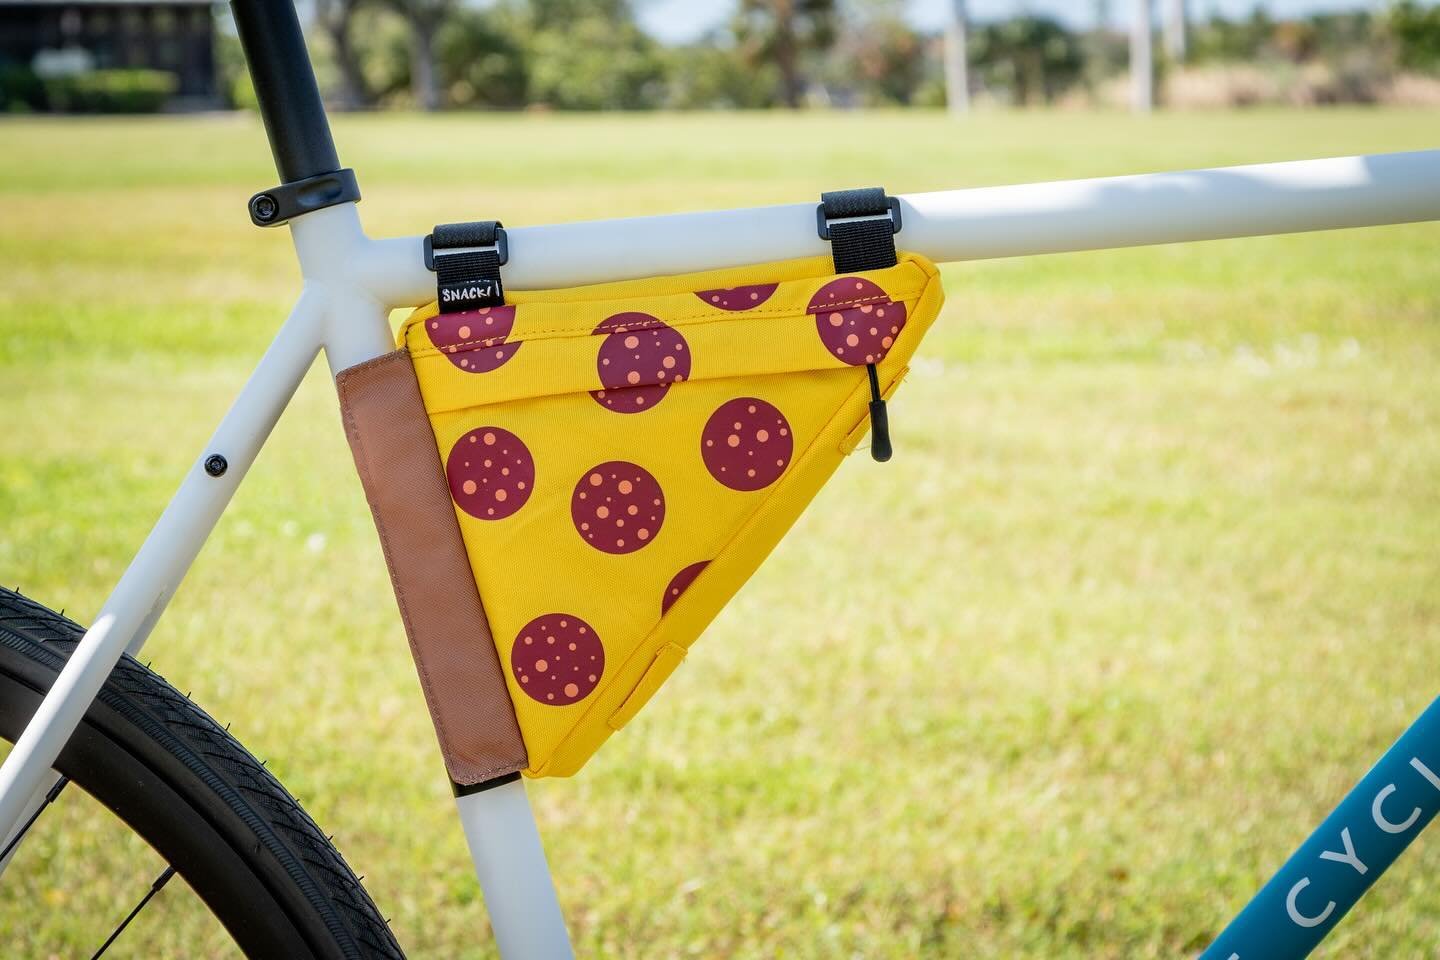 Why settle for ordinary when you can pedal with pizzazz? 

Stand out from the crowd and carry all your ride essentials with the pizza frame bag!

#SnackSocialClub #ridesnack #ridesnacks #snackride #snackbike #bikeride #bikebag #framebag #foryou #expl